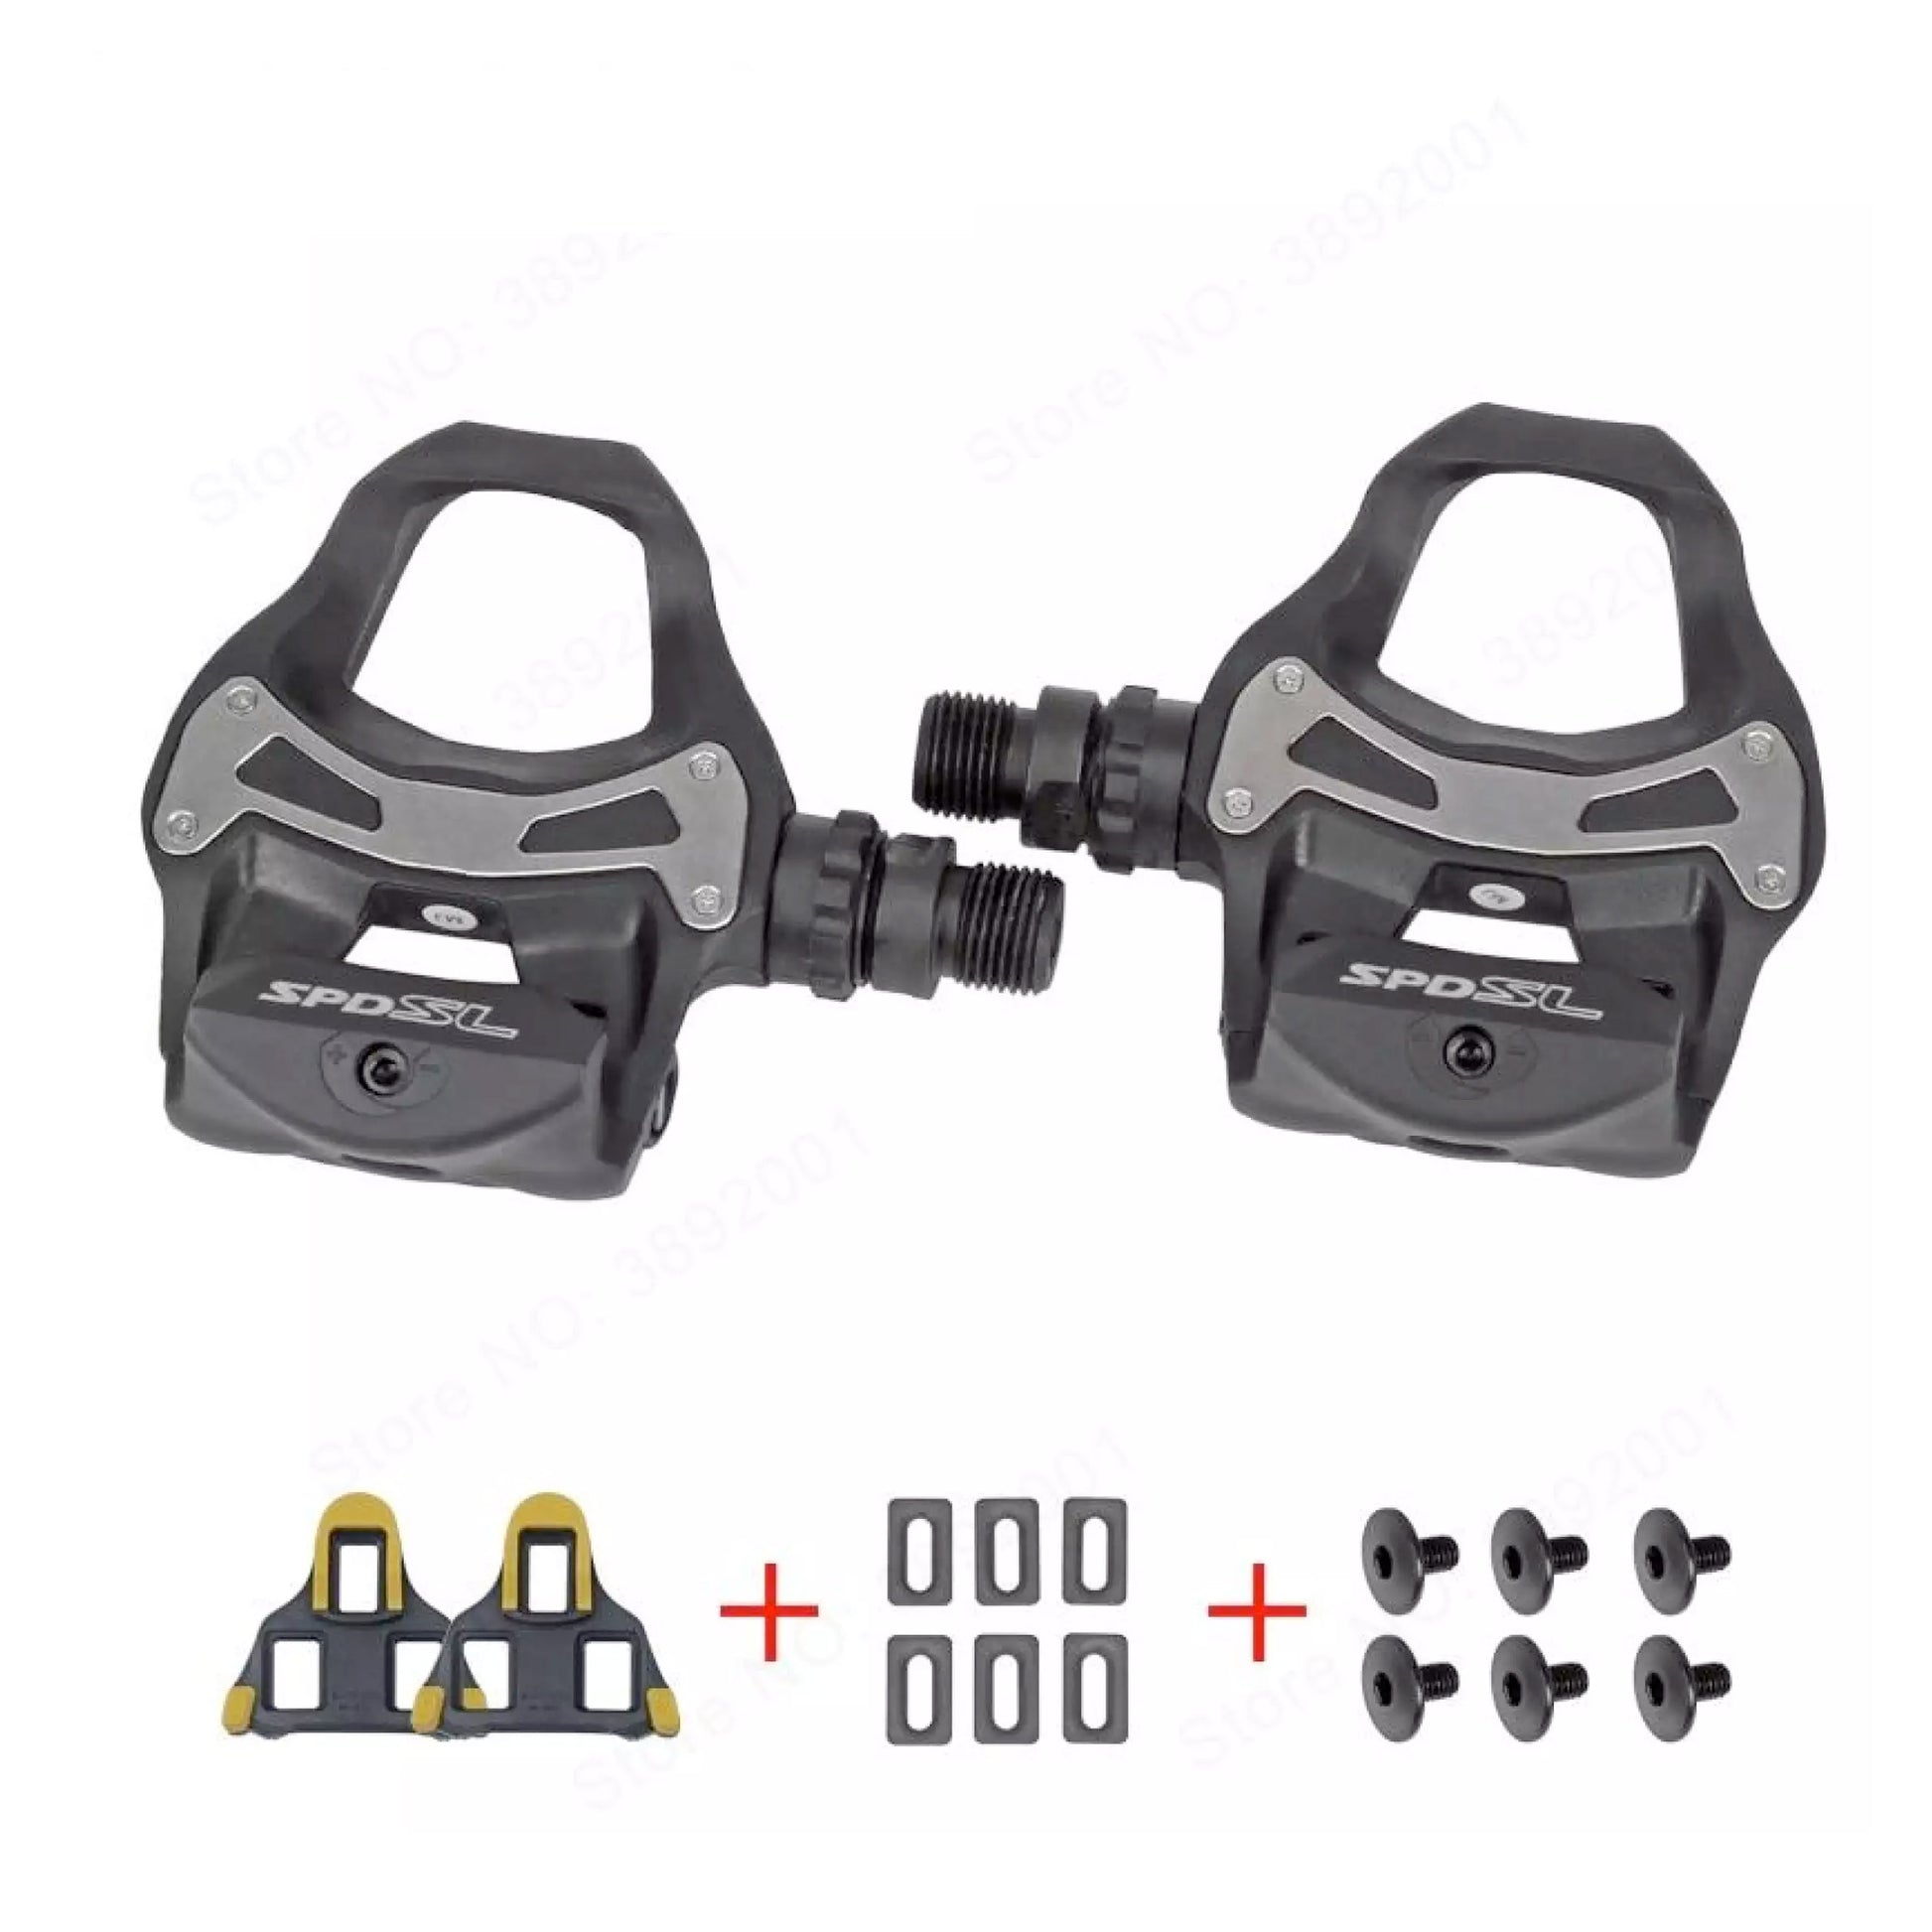 Shimano PD-R550 SPD-SL Carbon Road Pedals Including Cleats - Black buy online at Woolys Wheels Sydney